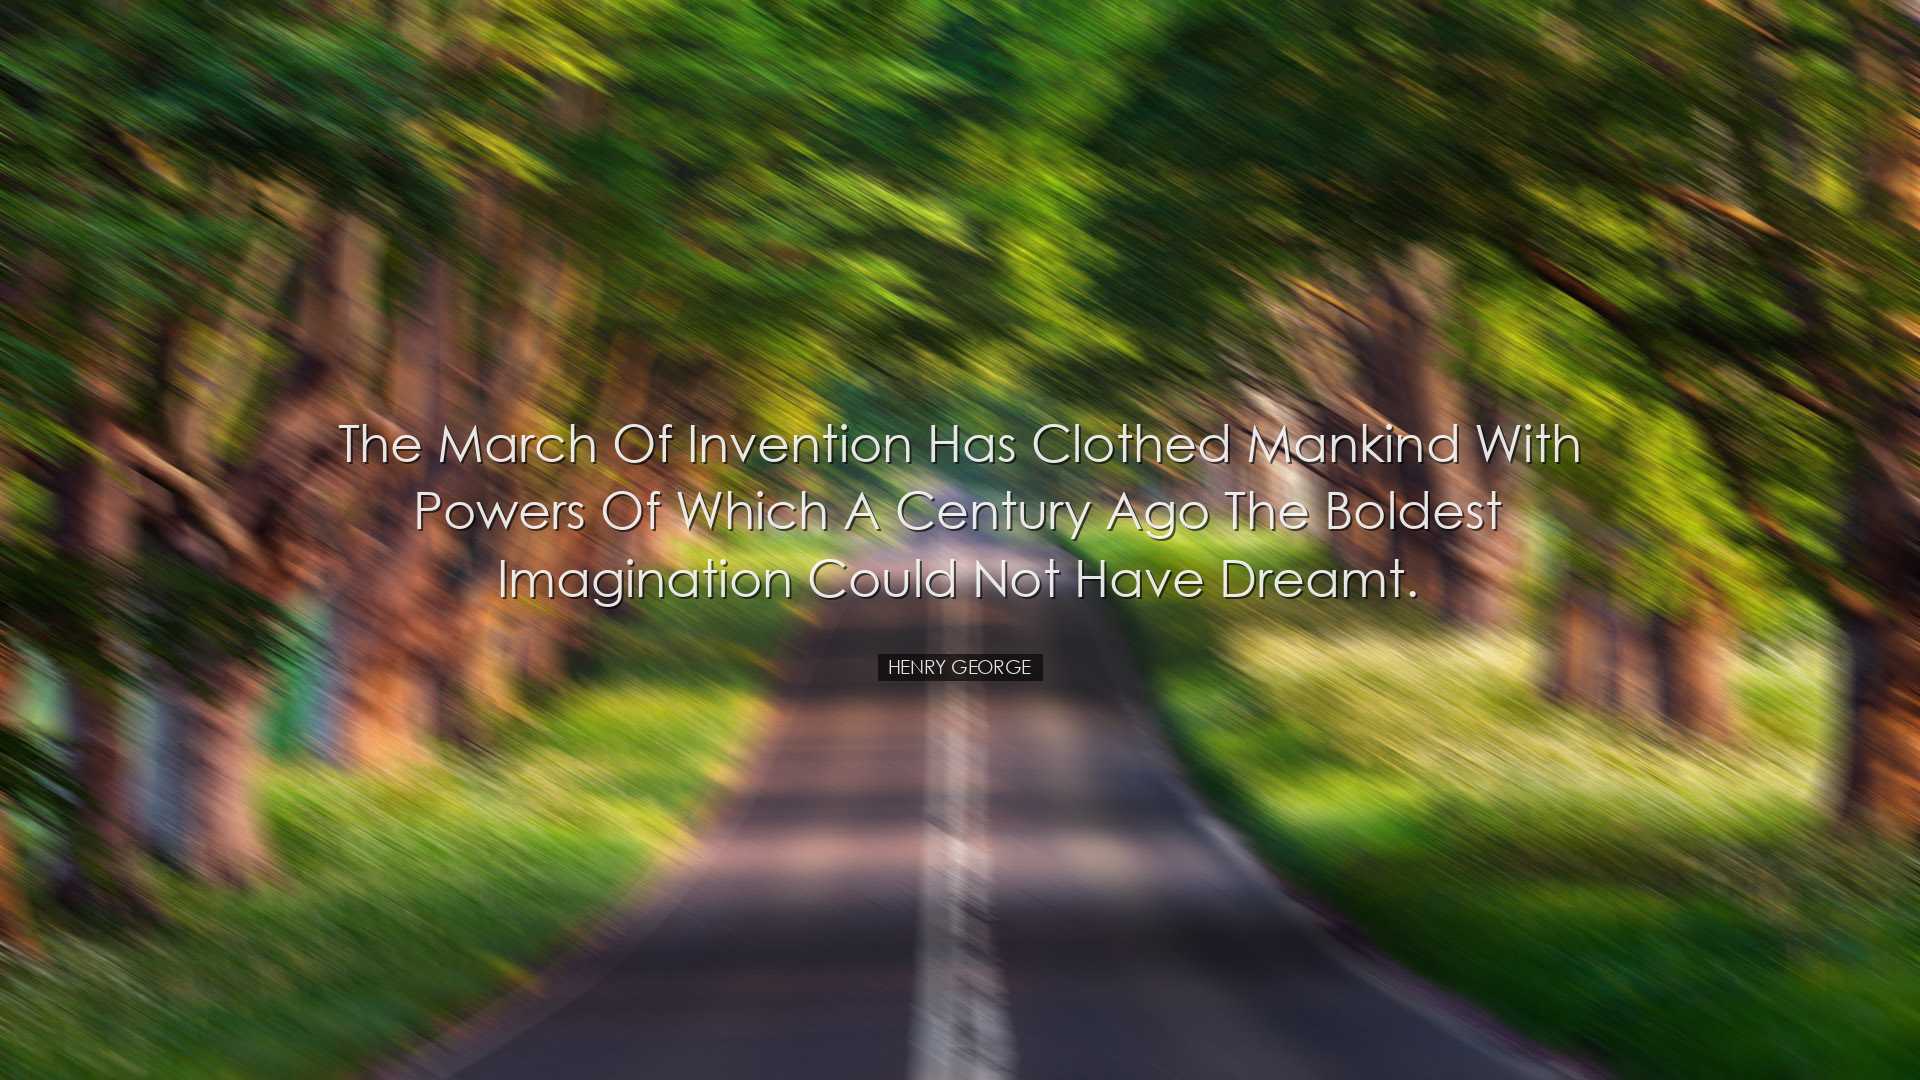 The march of invention has clothed mankind with powers of which a